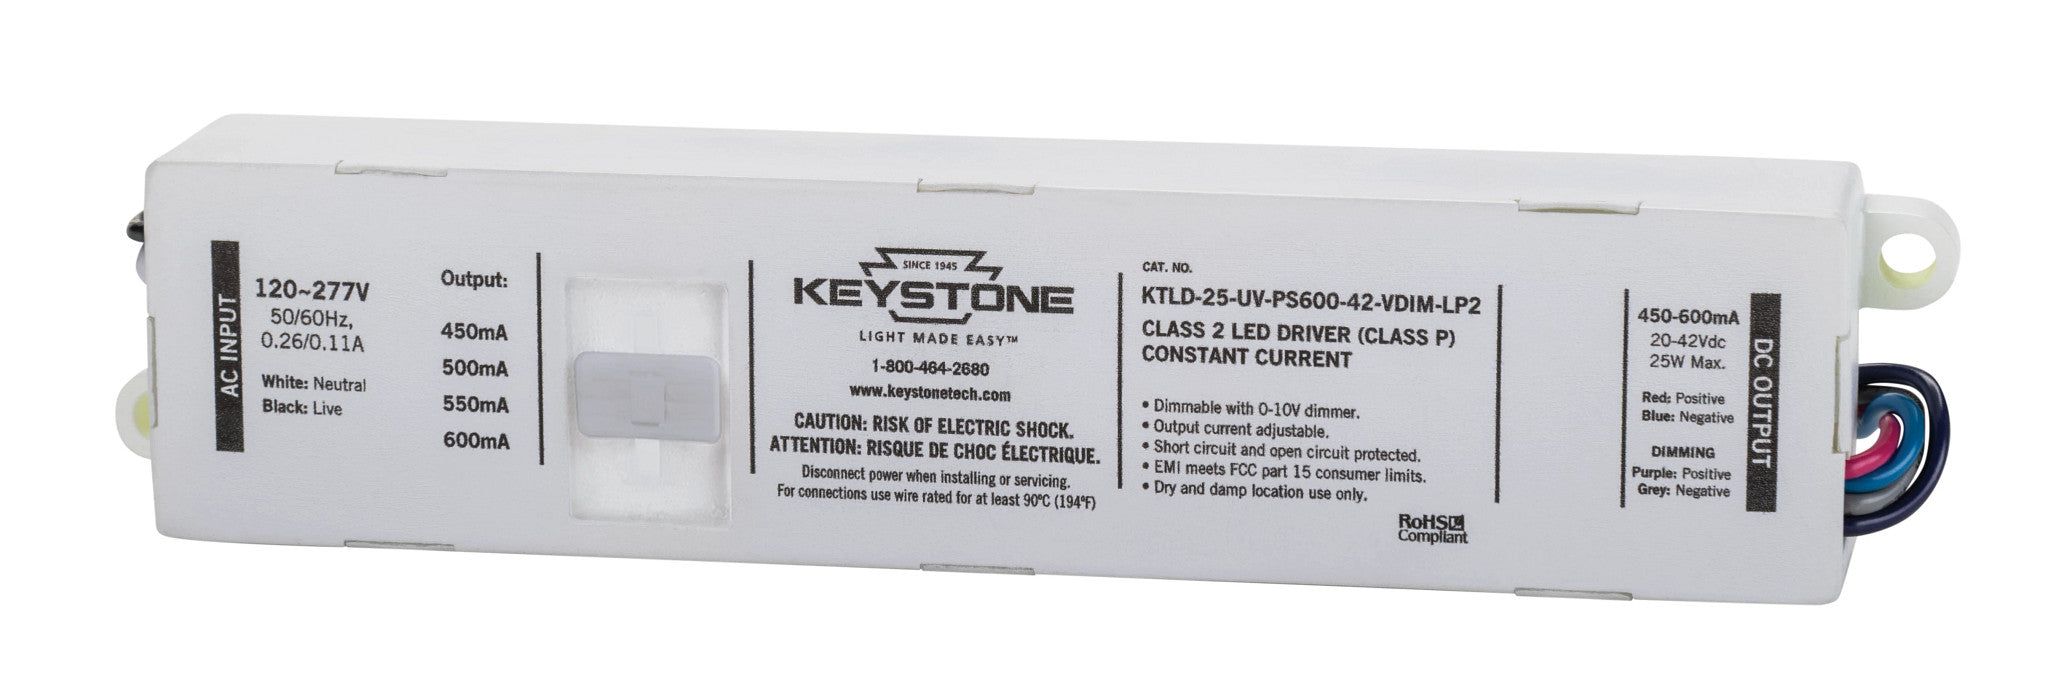 Keystone LED Driver 25W Selectable Output Currents Include 450Ma 600Ma 20-42VDC Output Voltage 0-10V Dimming (KTLD-25-UV-PS600-42-VDIM-LP2)